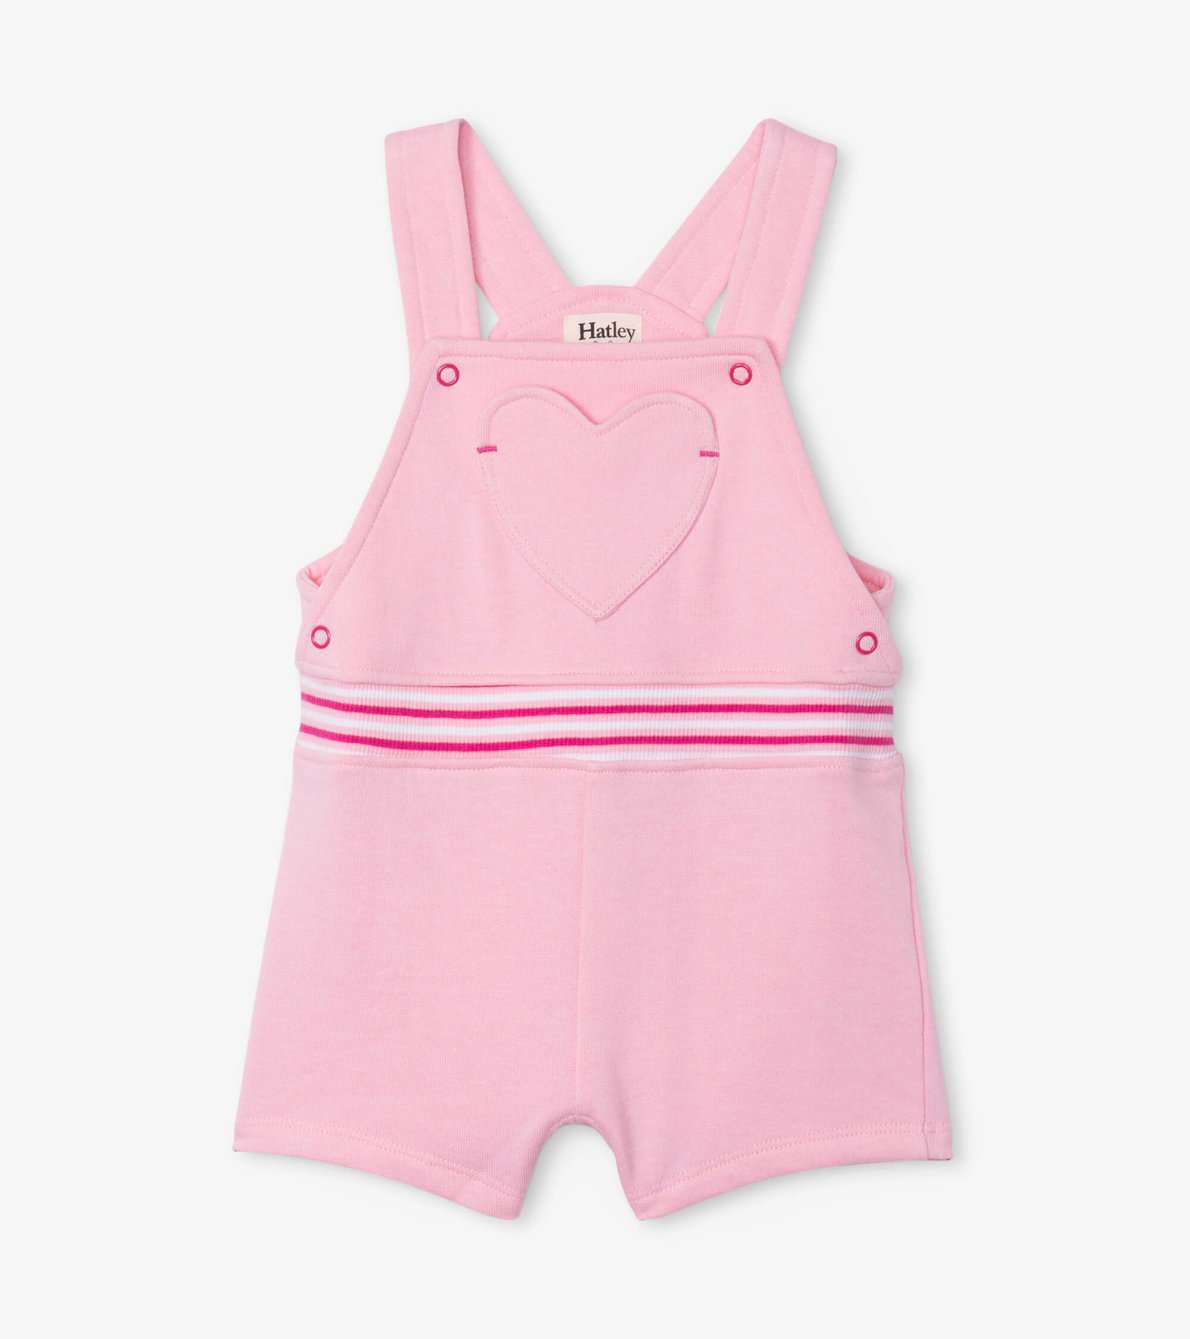 View larger image of Candy Pink Baby Overalls